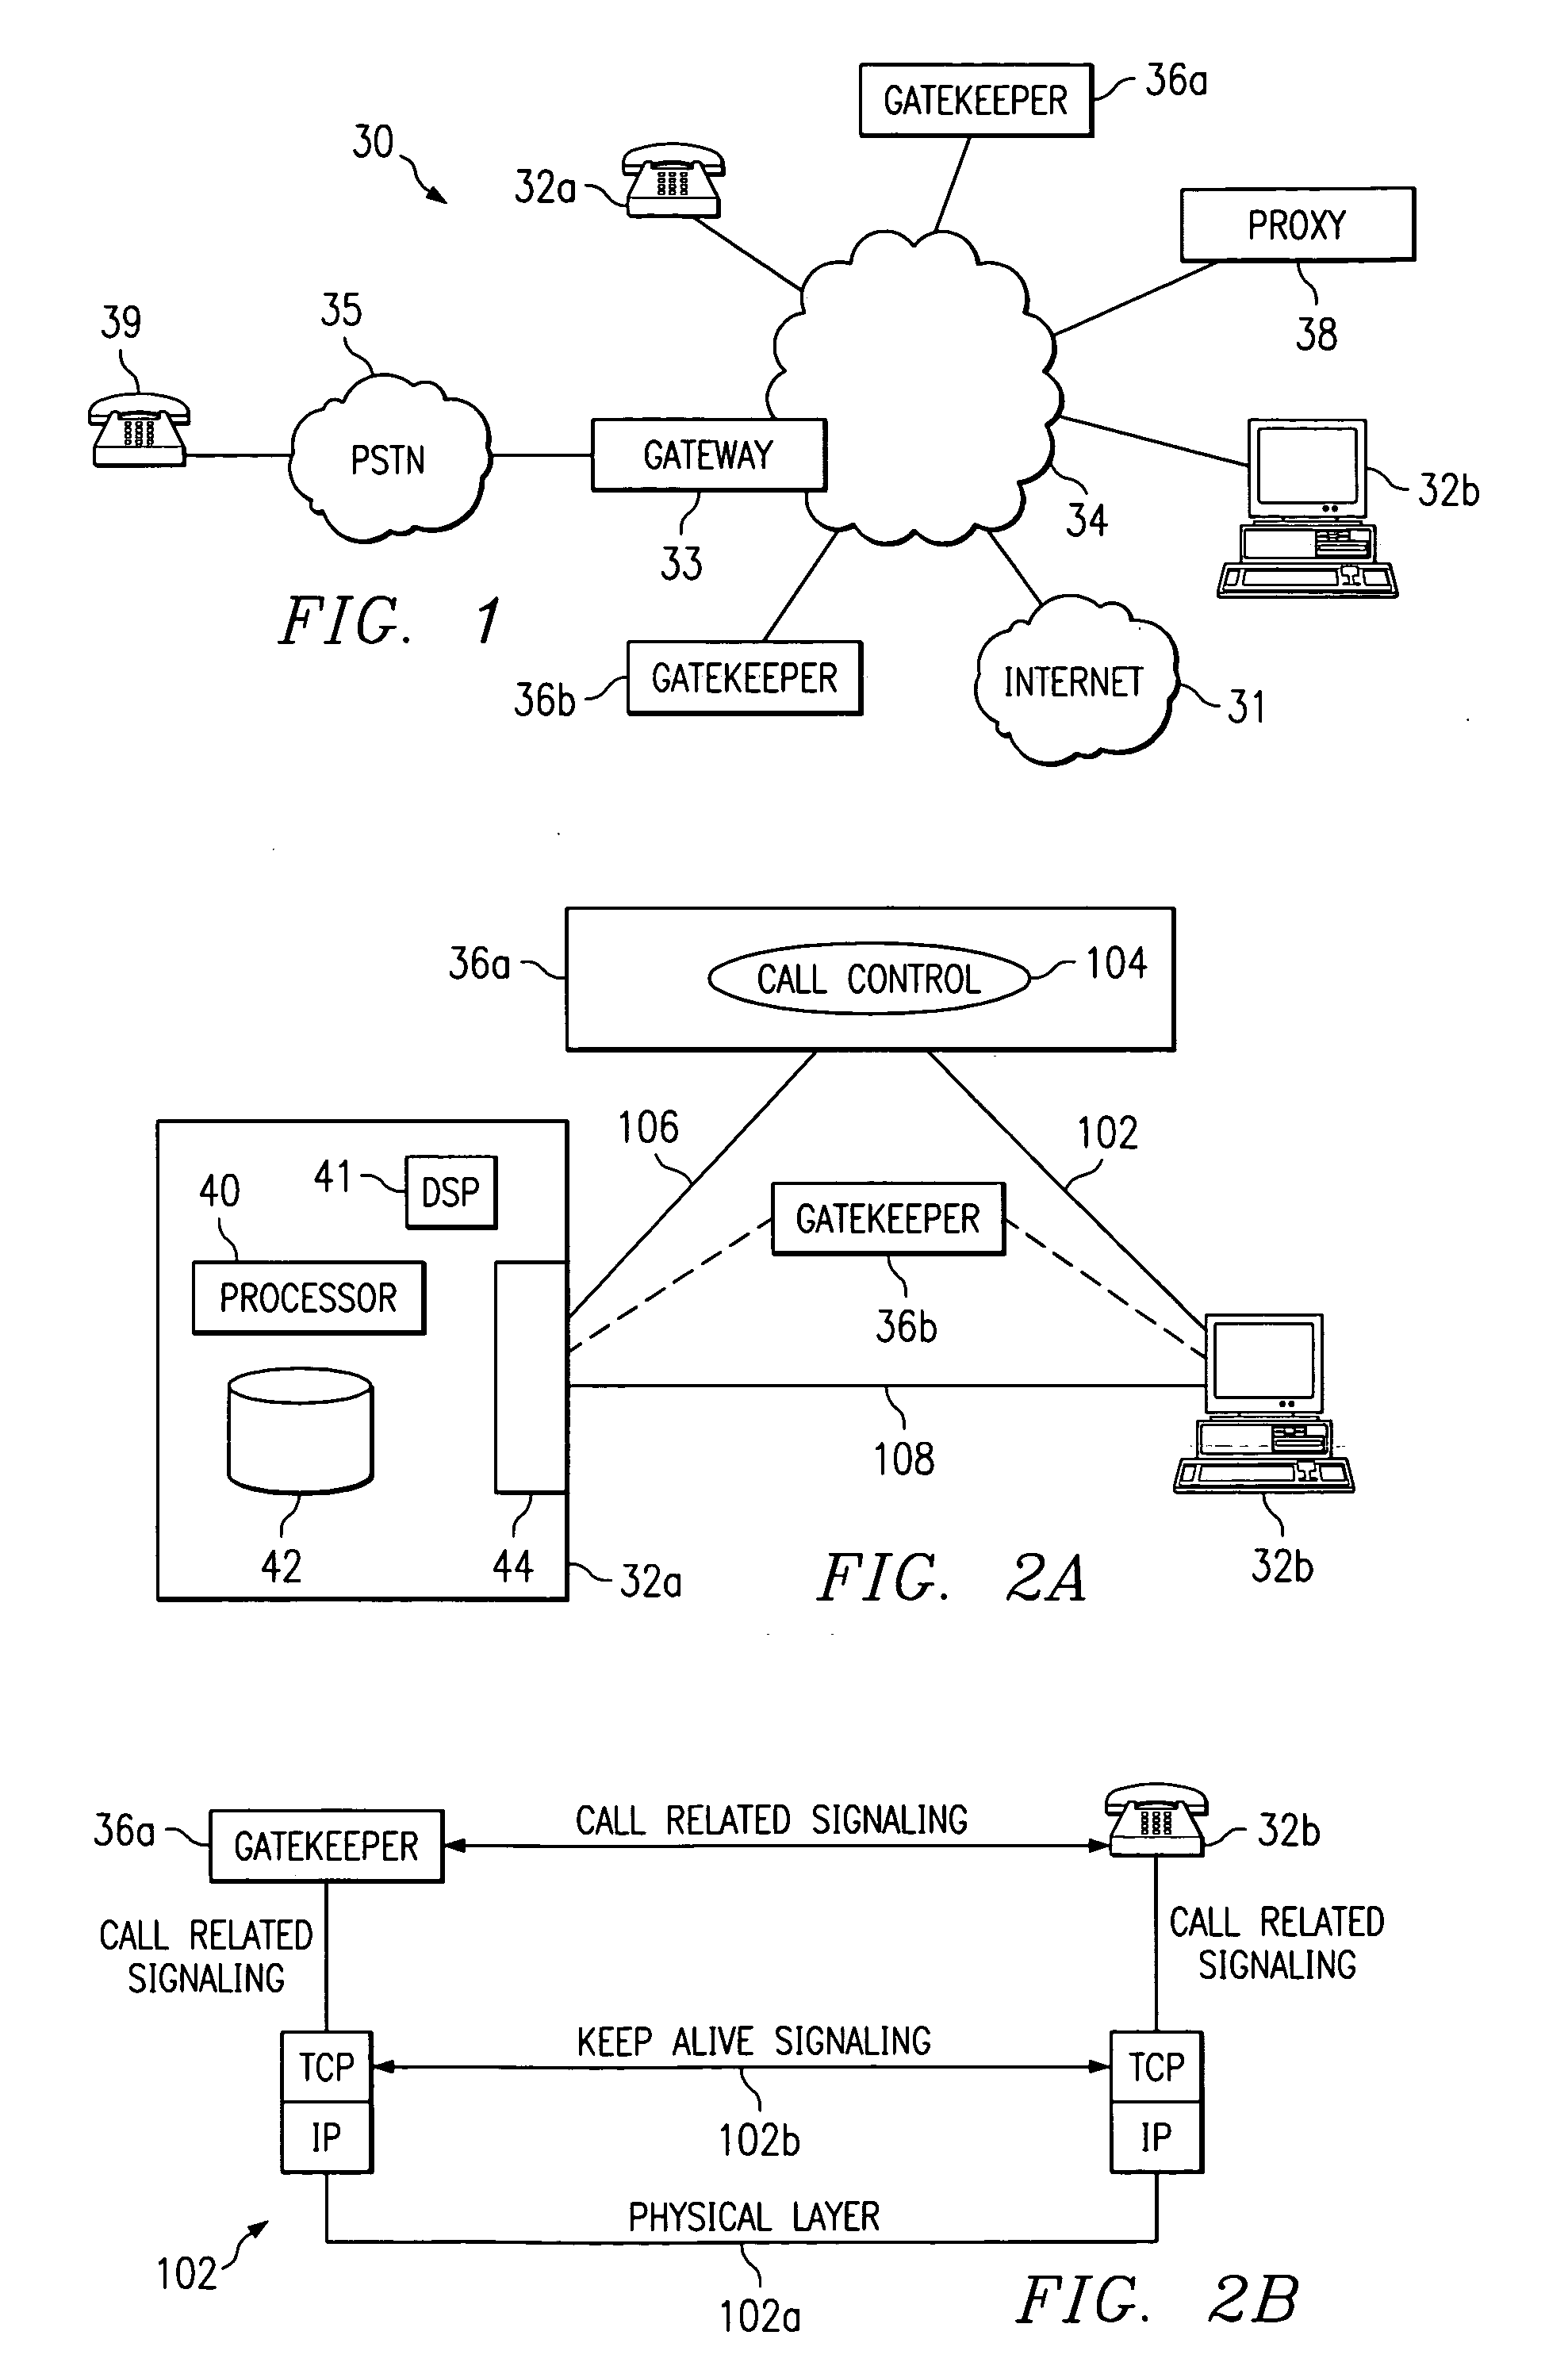 System and method for maintaining a communication session over gatekeeper failure